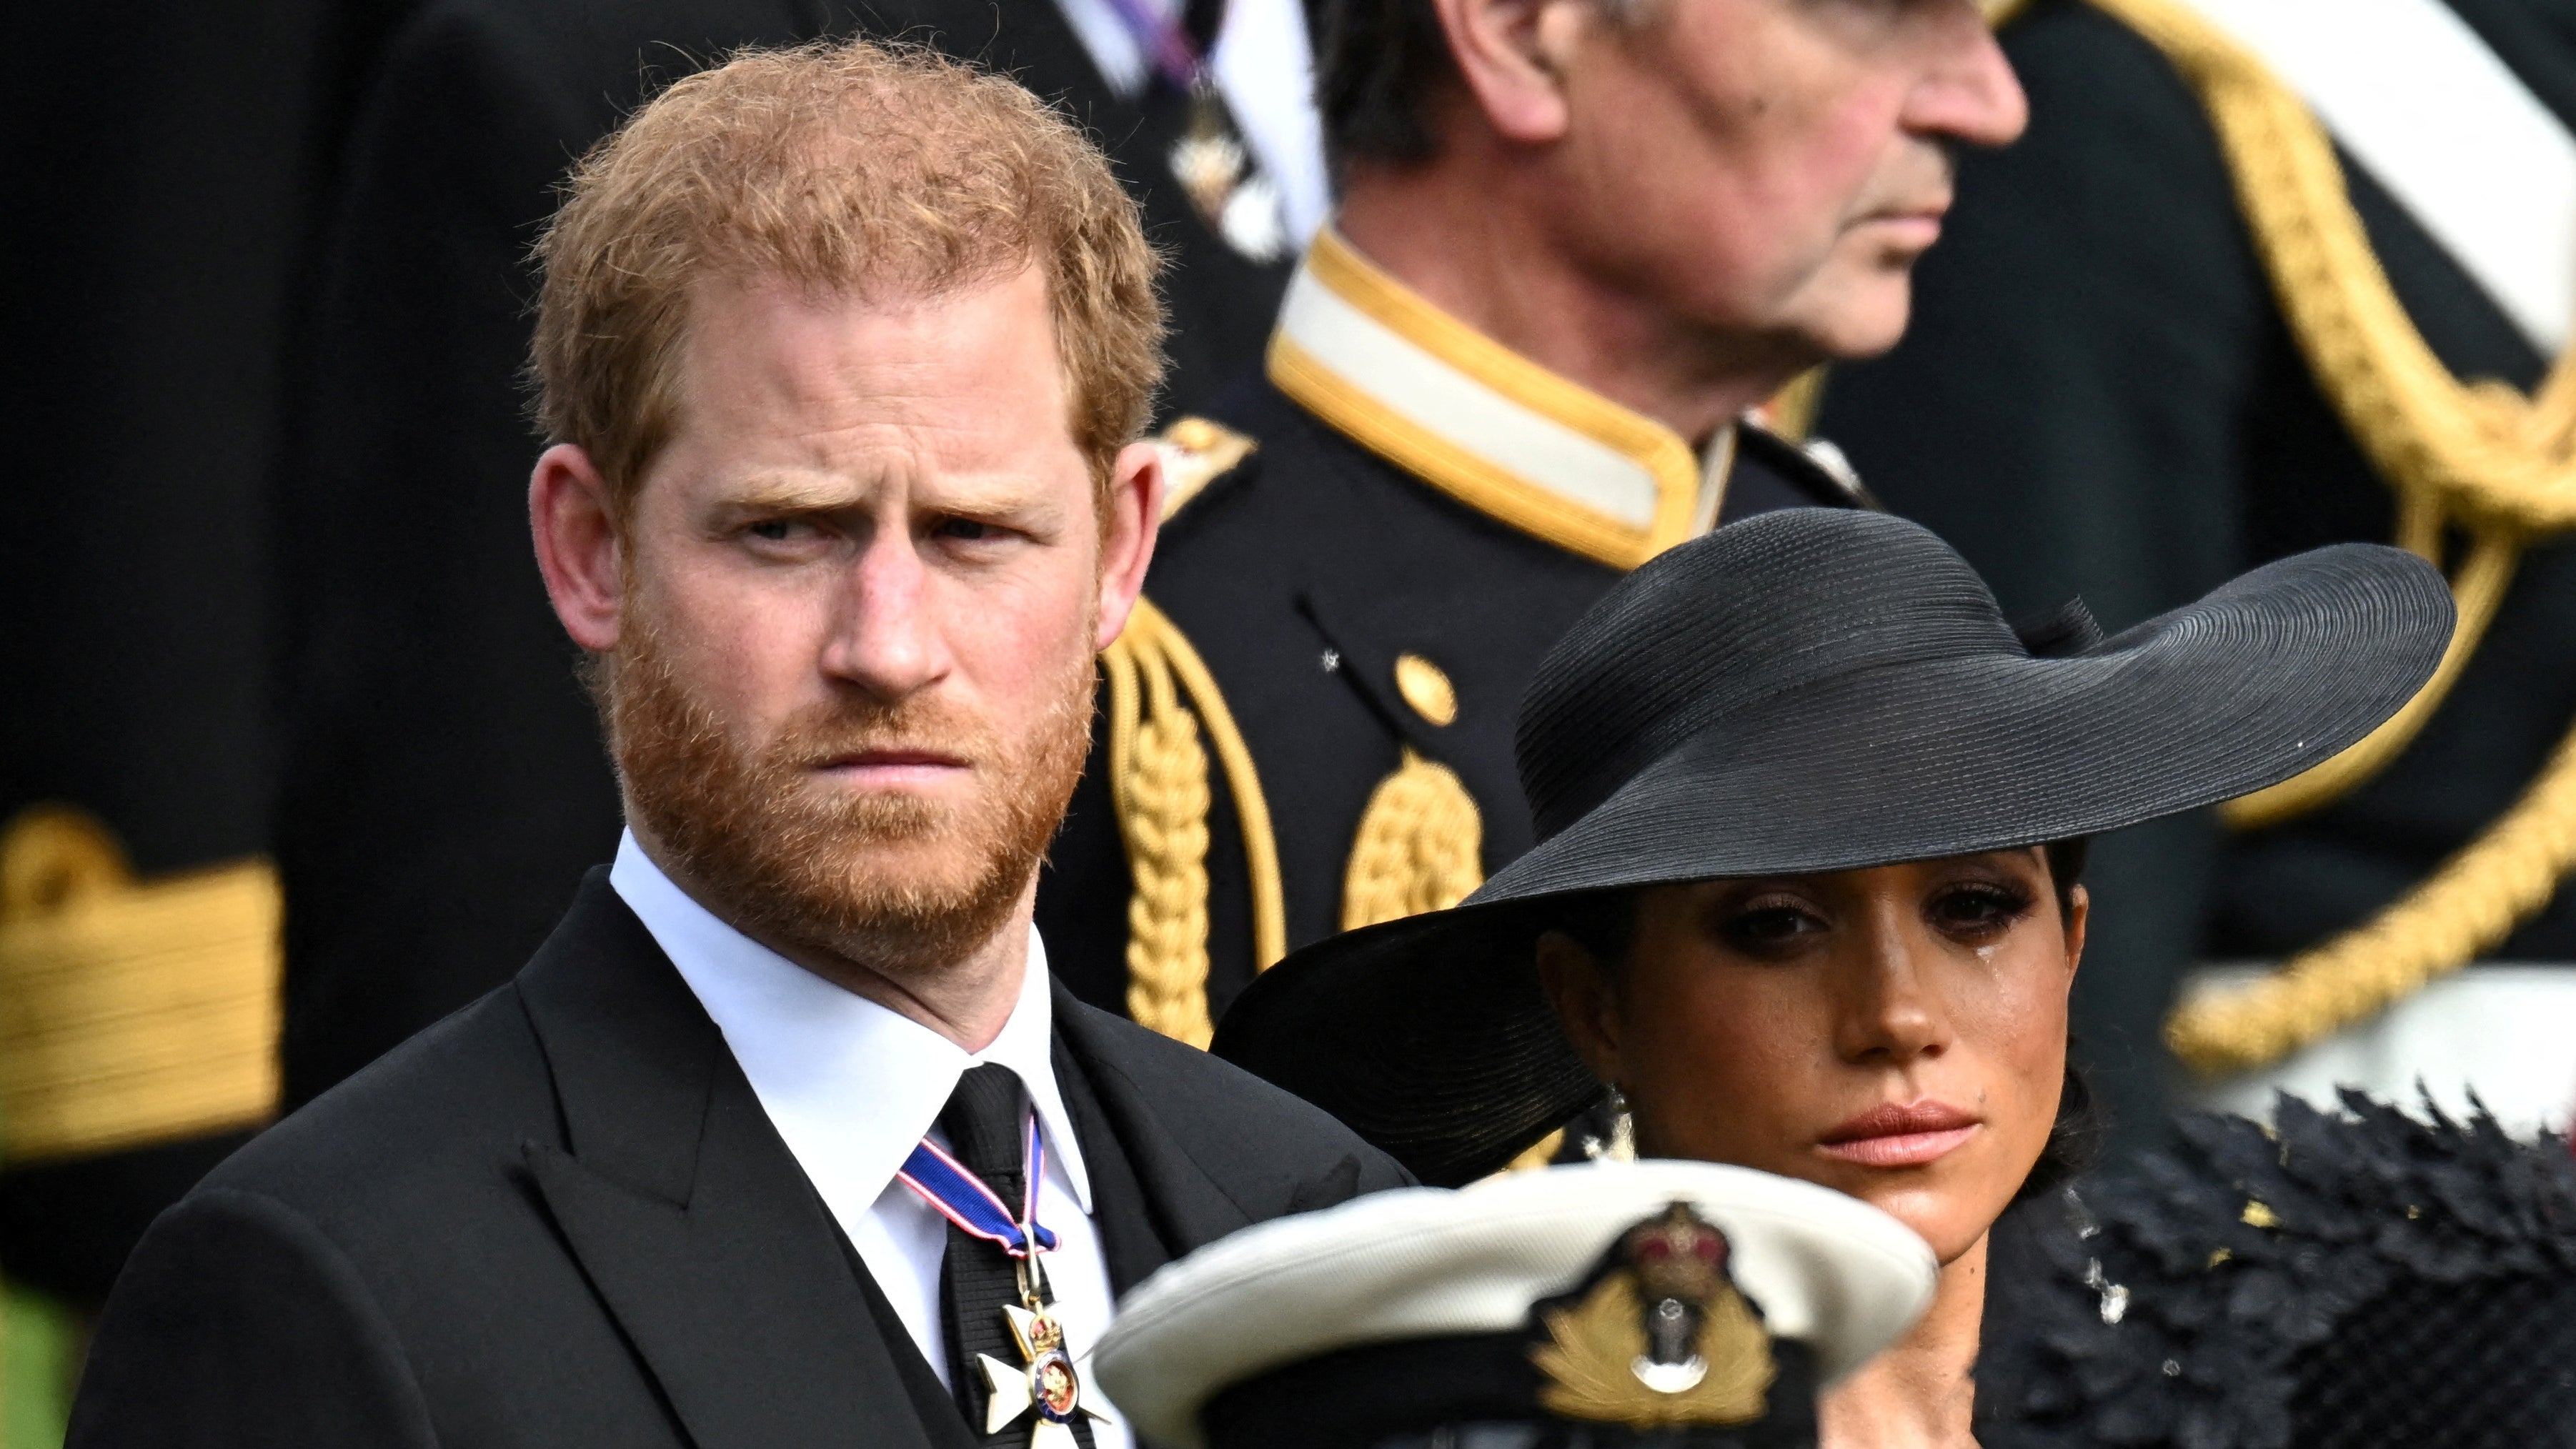 Prince Harry and Meghan attend the state funeral and burial of Queen Elizabeth